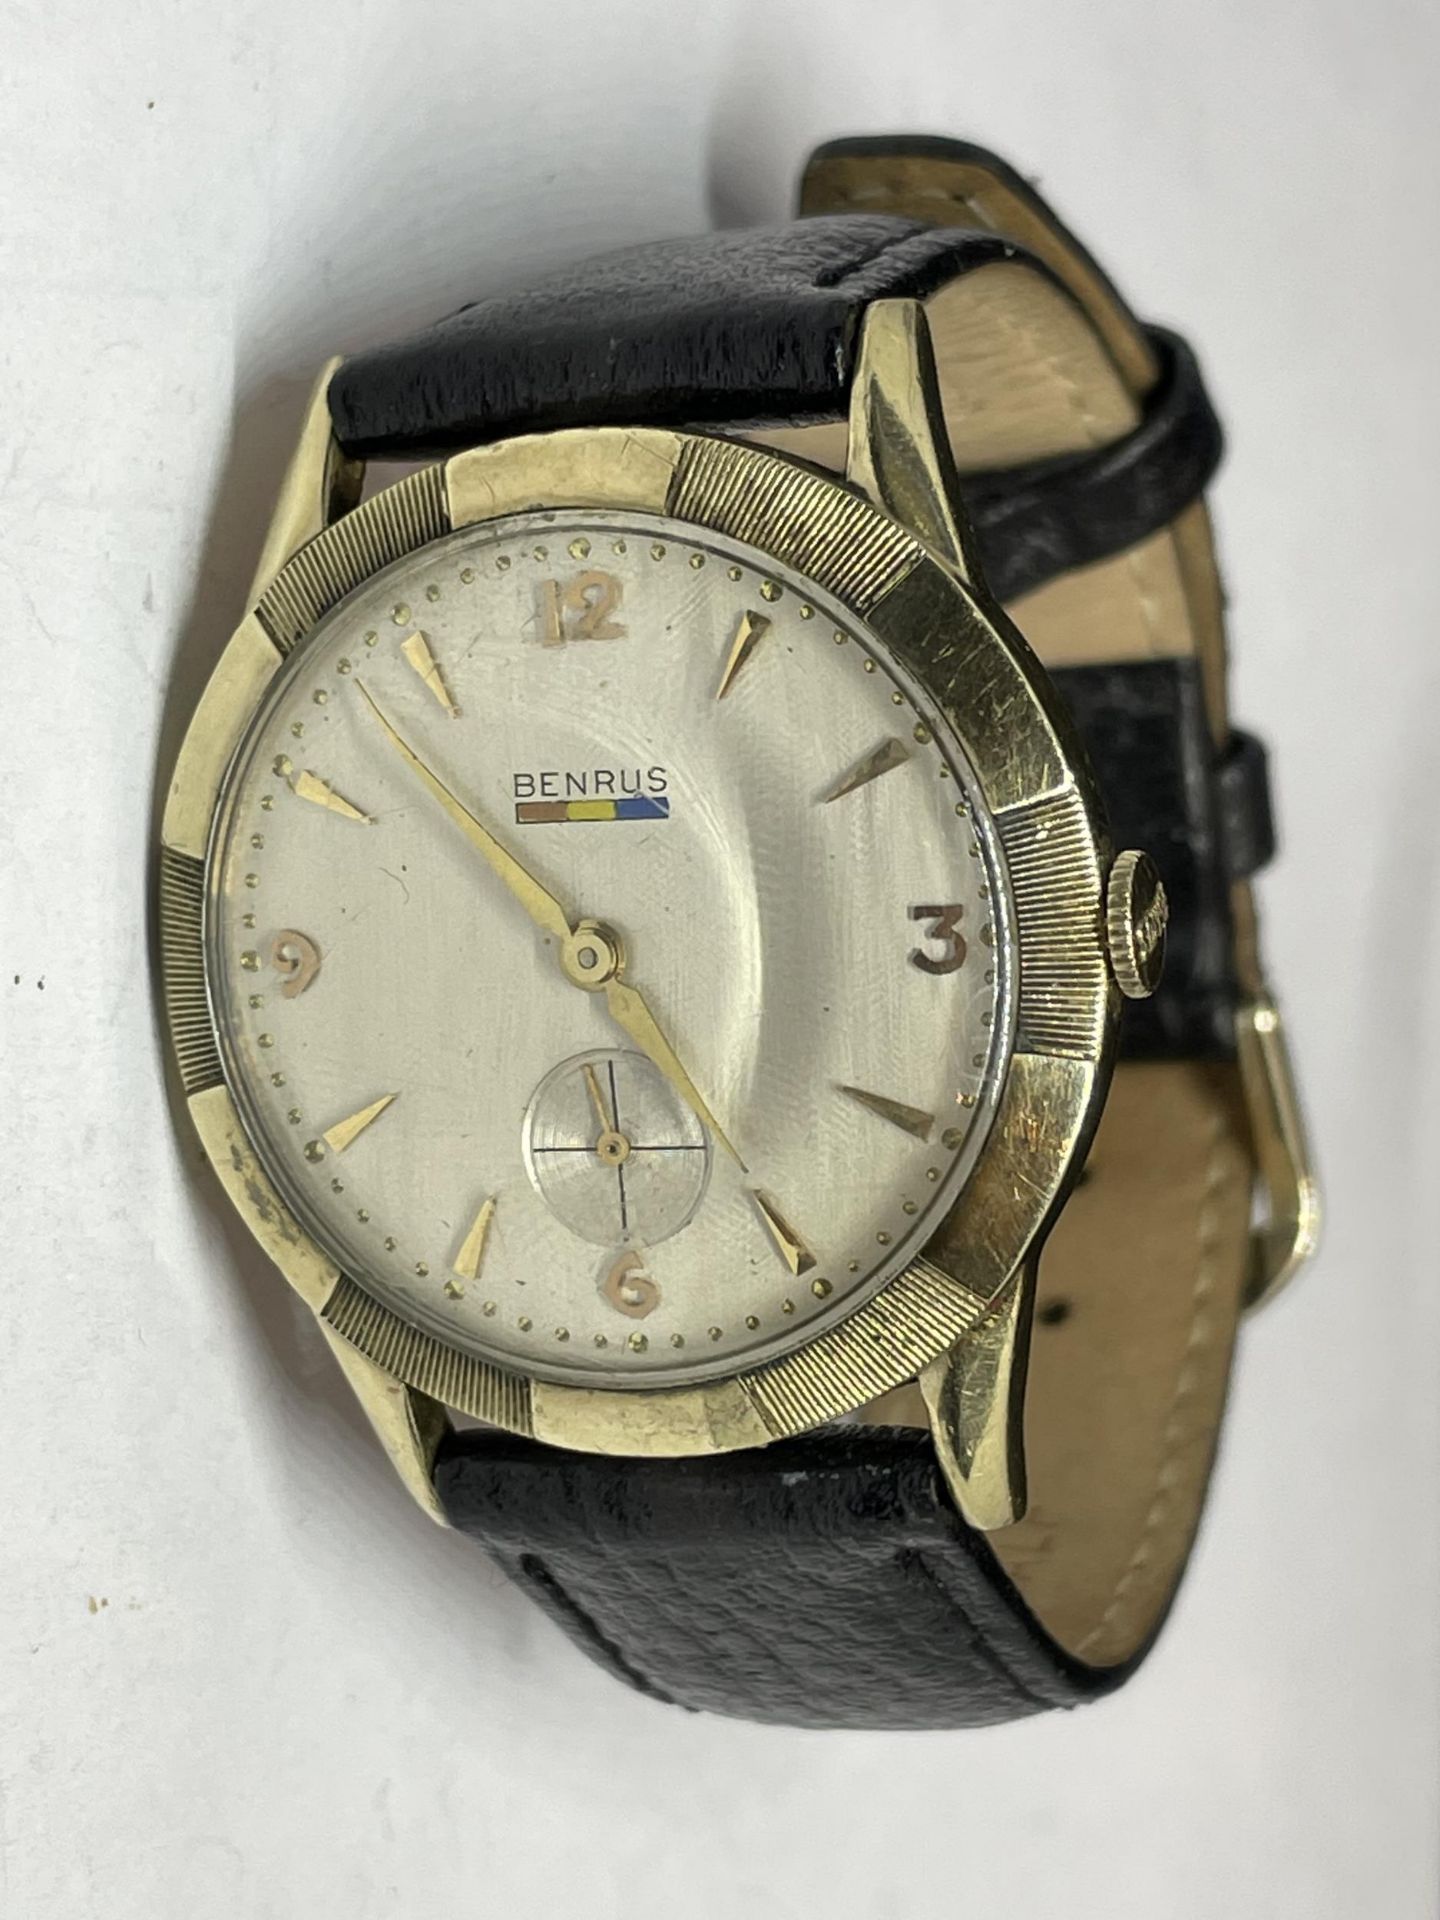 A BENRUS VINTAGE SUB DIAL WRIST WATCH SEEN WORKING BUT NO WARRANTY ENGRAVED - Image 3 of 9